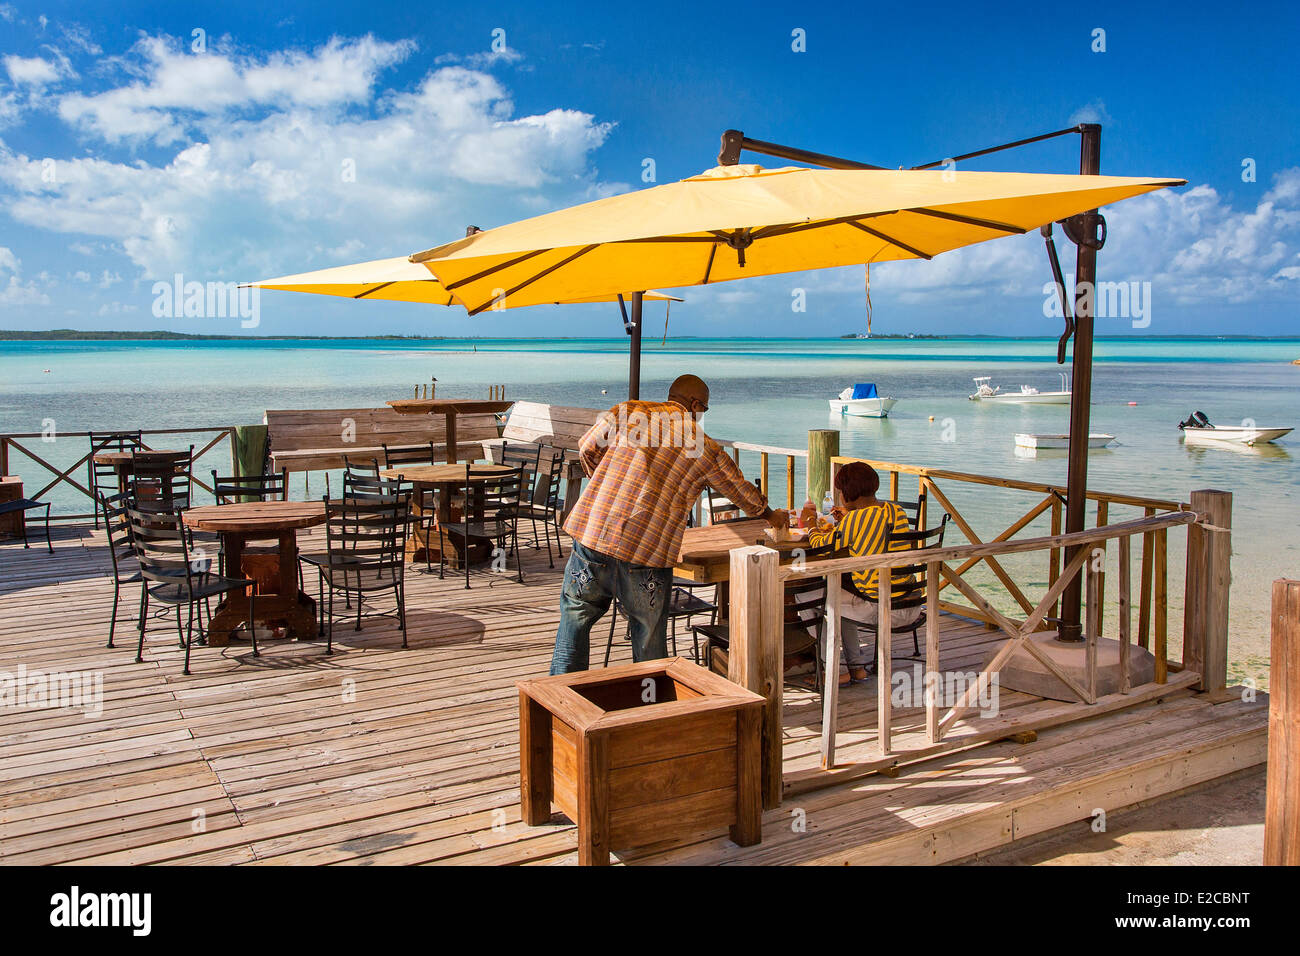 Bahamas, Harbour Island, Queen Conch Restaurant known for its Conch Salads Stock Photo